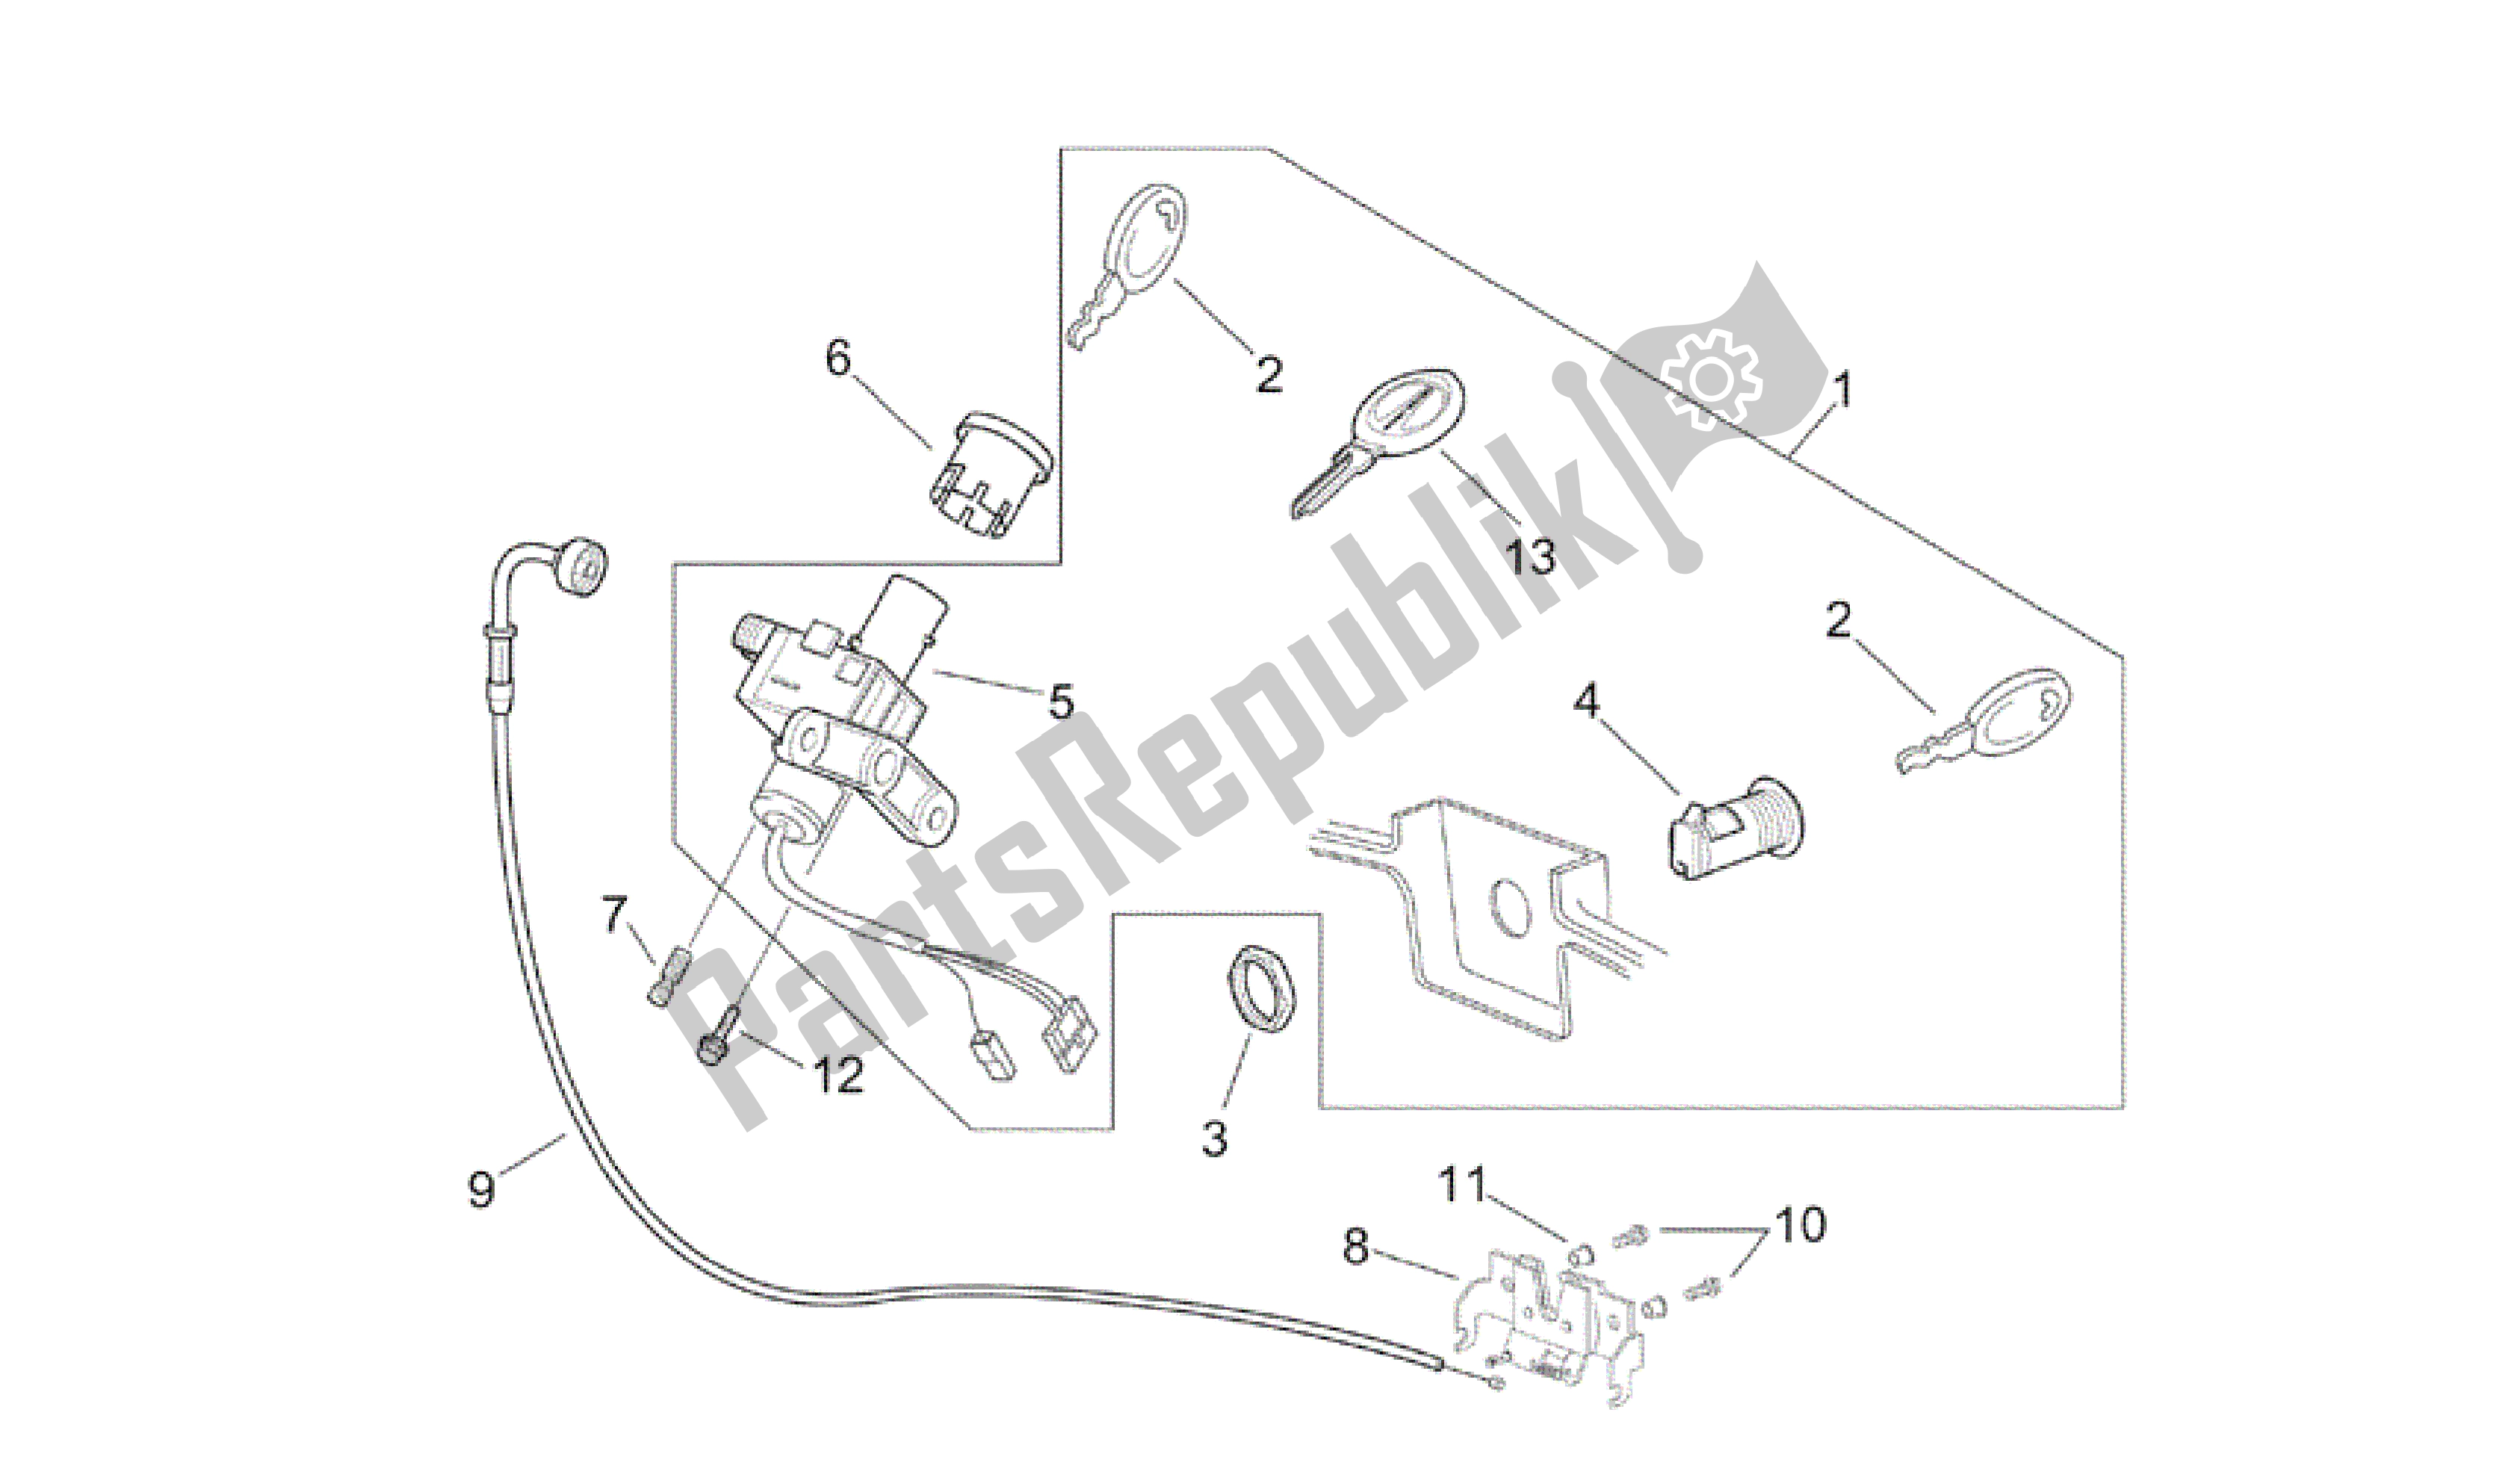 All parts for the Lock Hardware Kit of the Aprilia Scarabeo 200 1999 - 2004